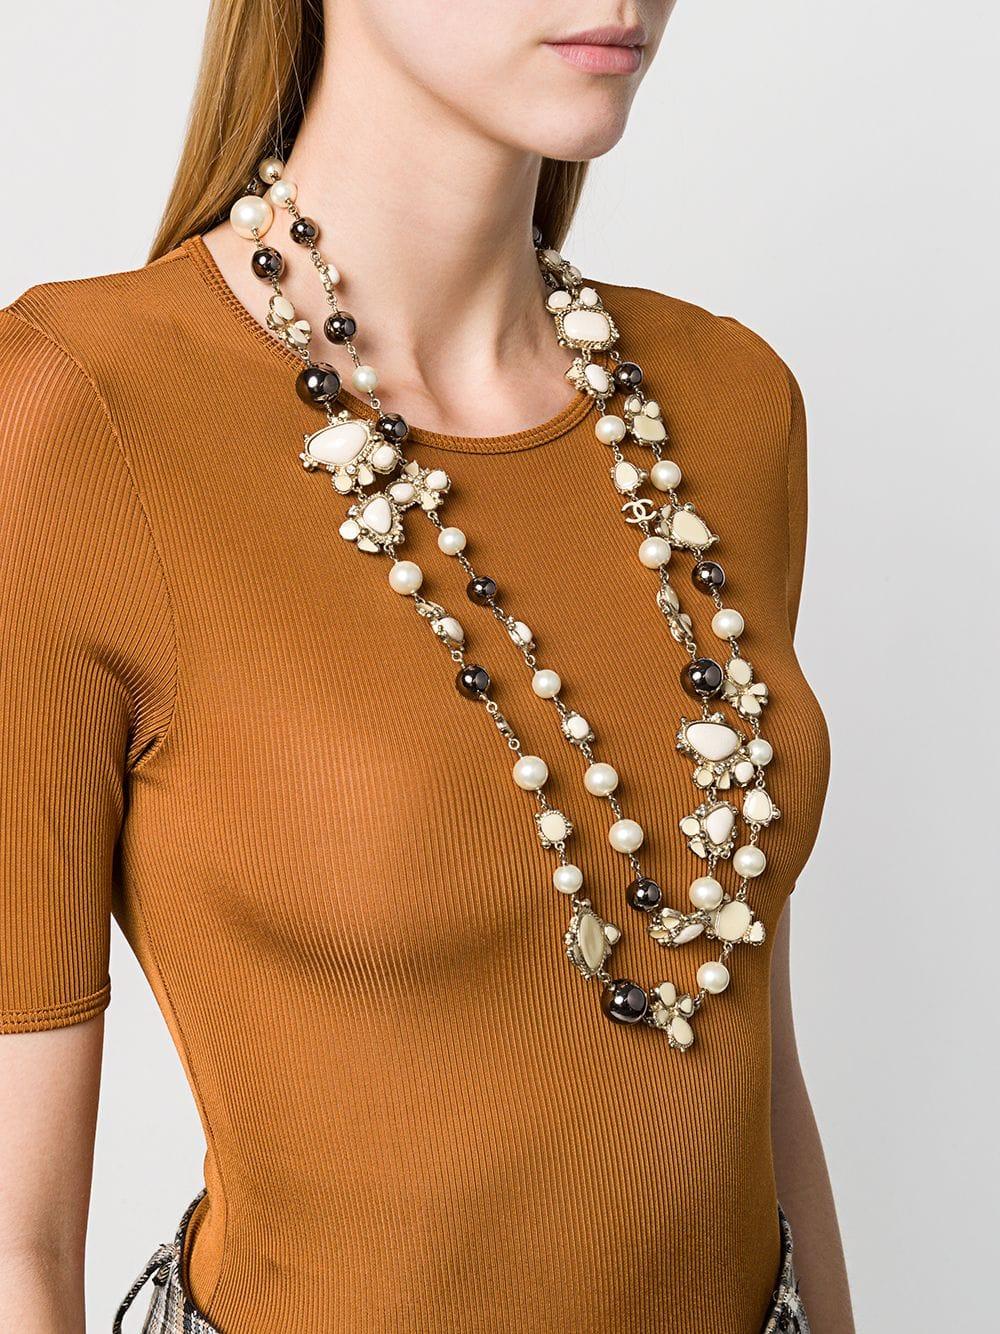 Chanel Pre-Owned Cc Faux Pearl Necklace in Metallic - Lyst